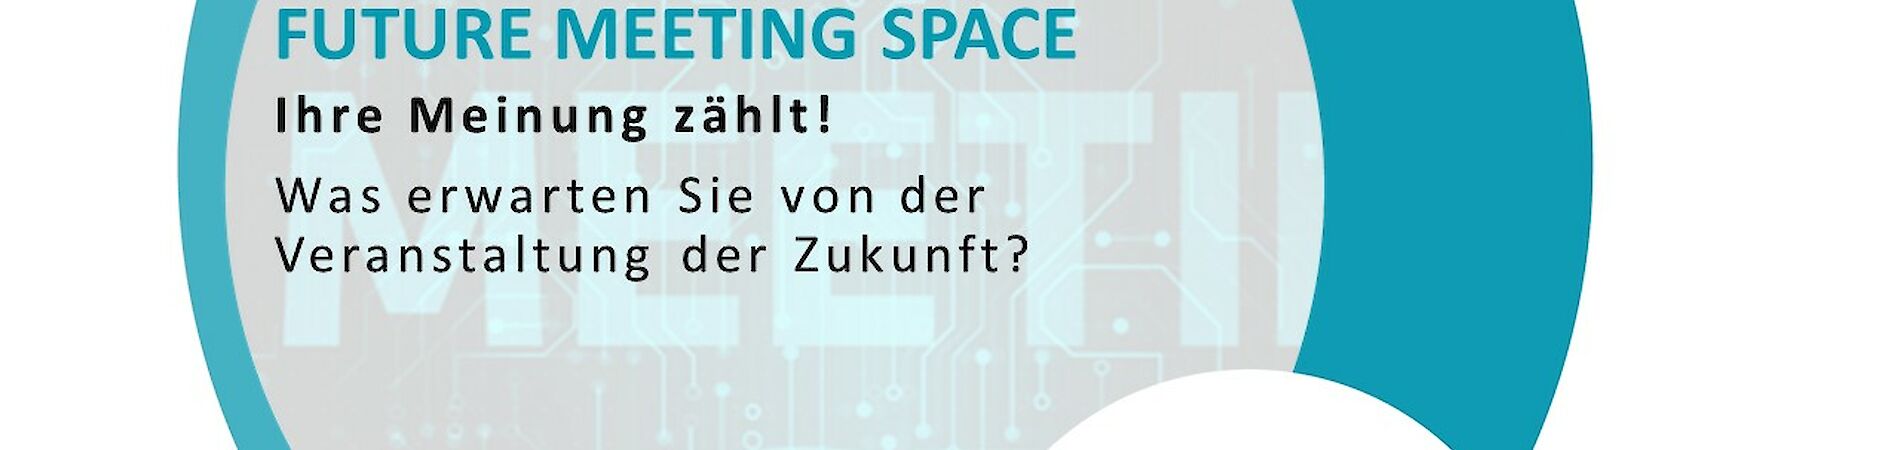 Future Meeting Space Key Visual with call to action (in German language) "Ihre Meinung zählt", i.e. "Your opinion counts".